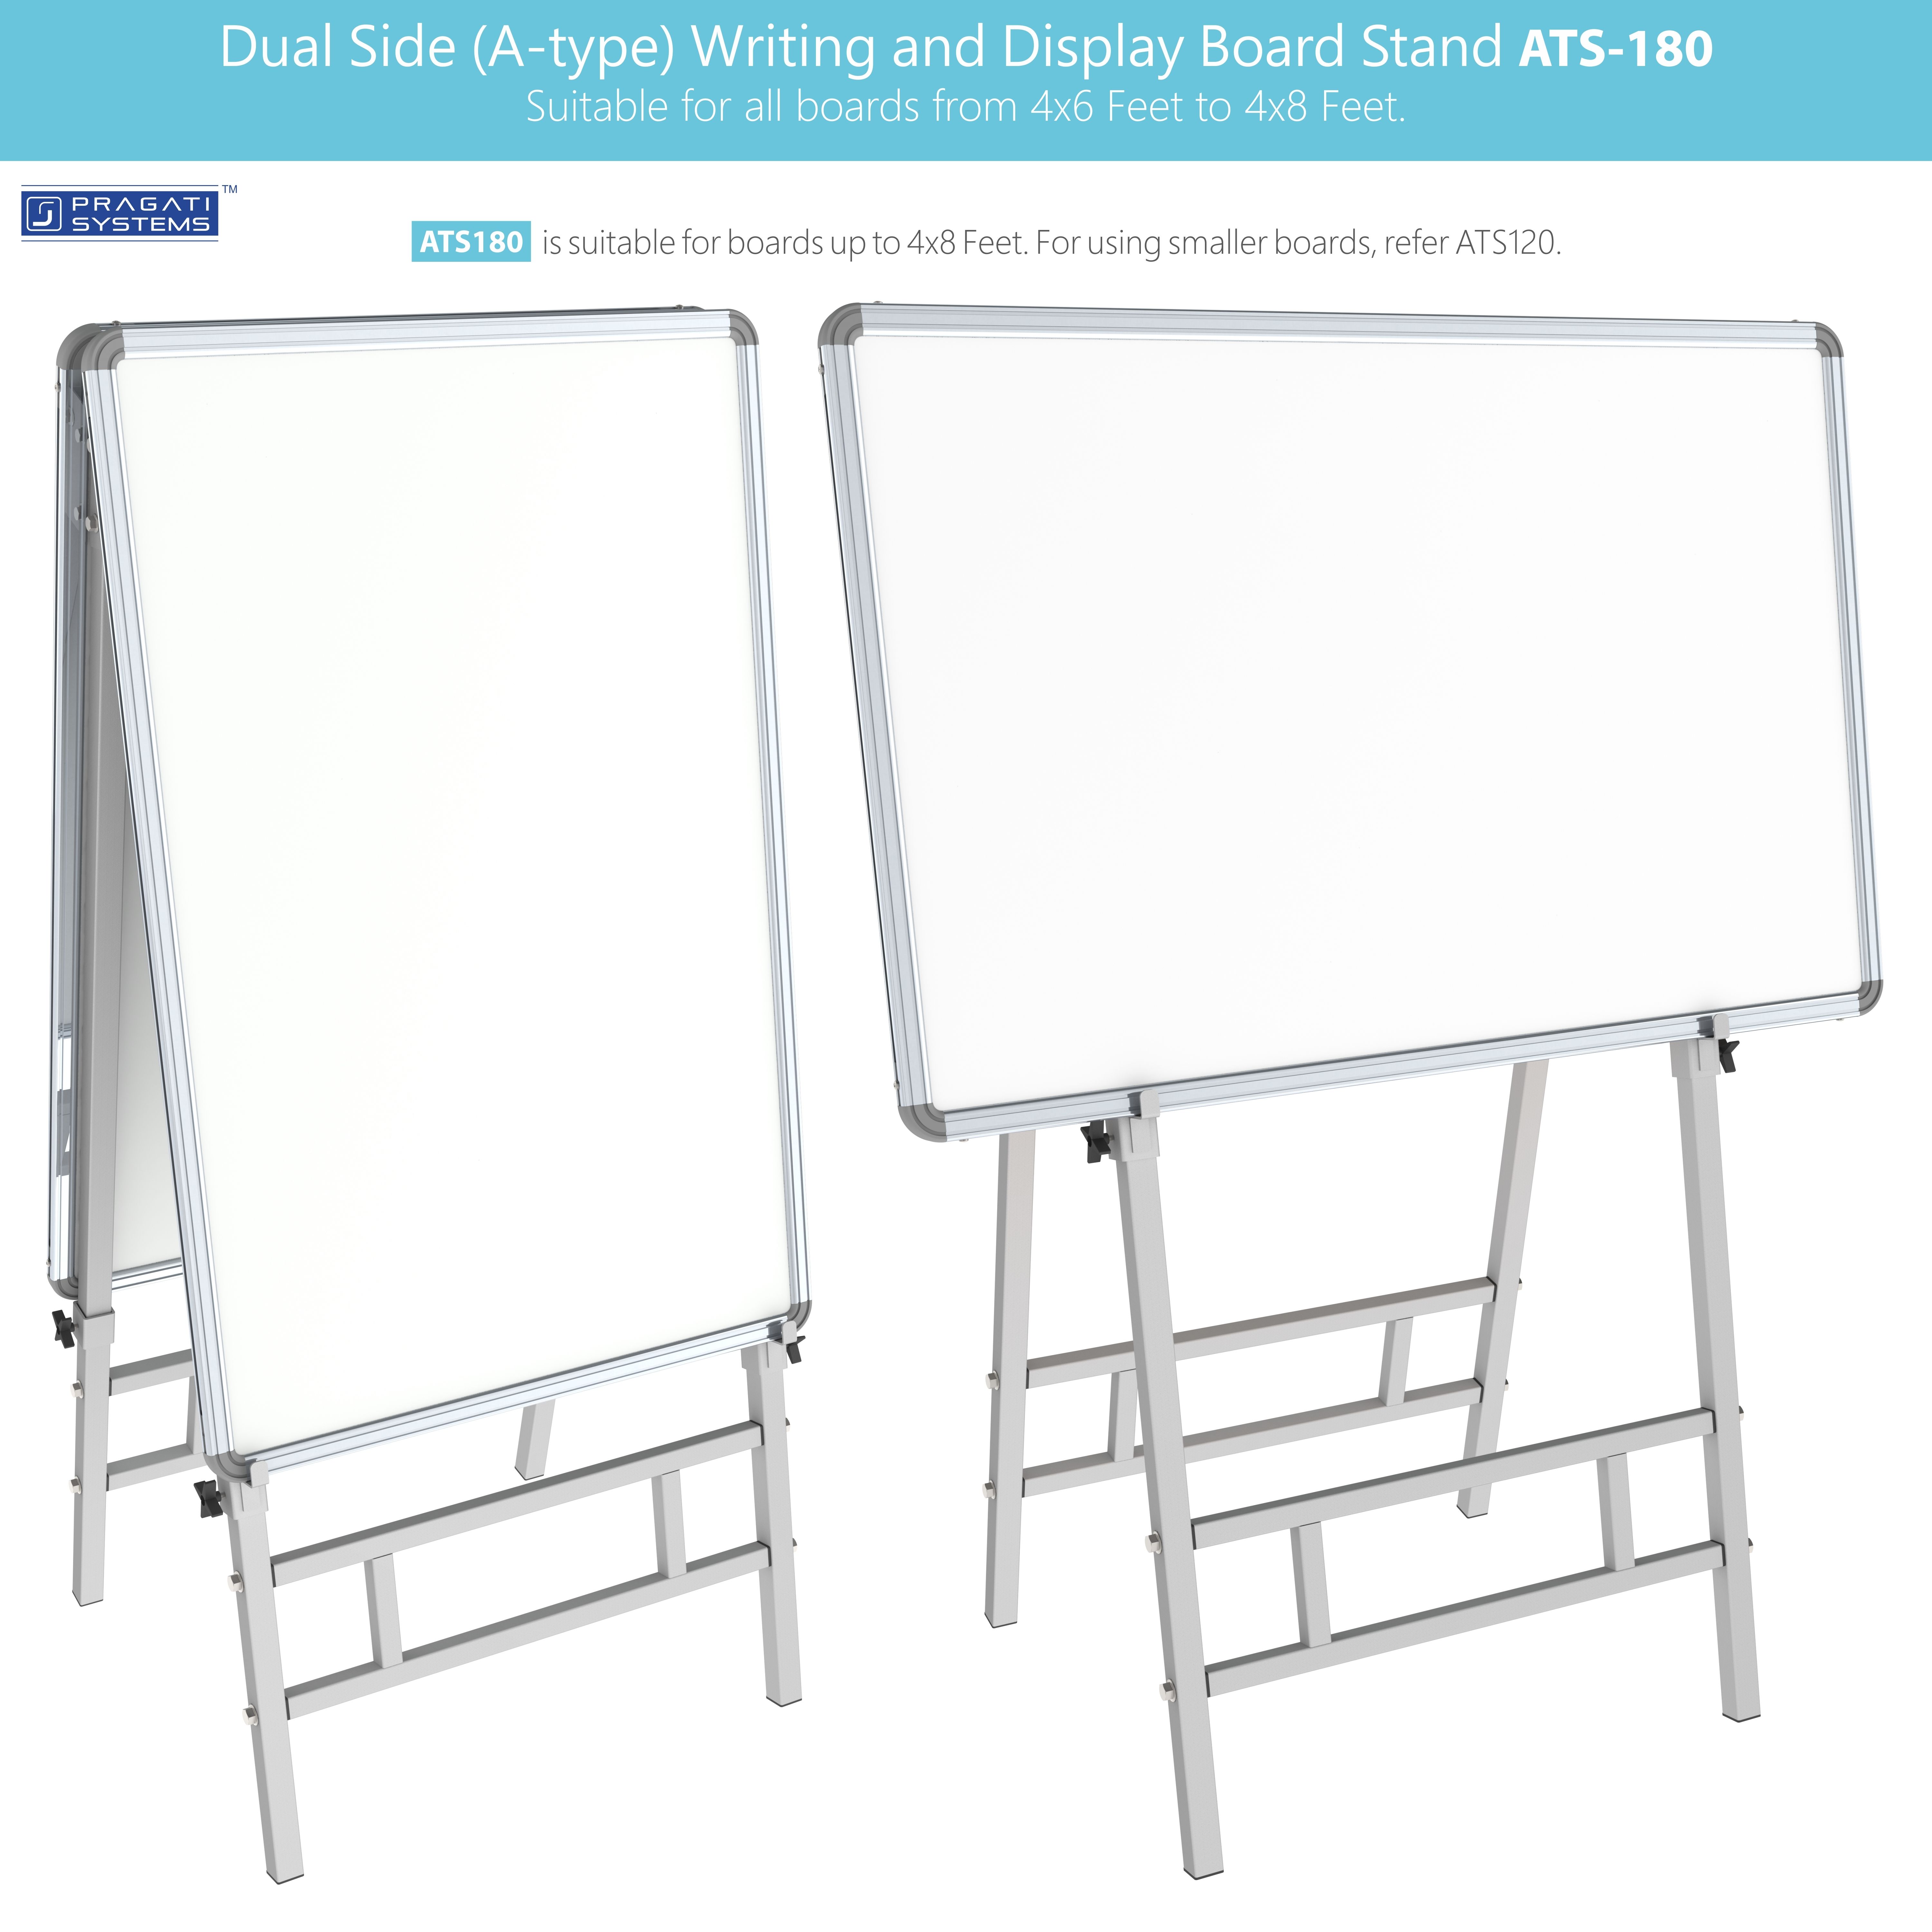 A-type Stand For 4x6 Feet Board ATS 120180